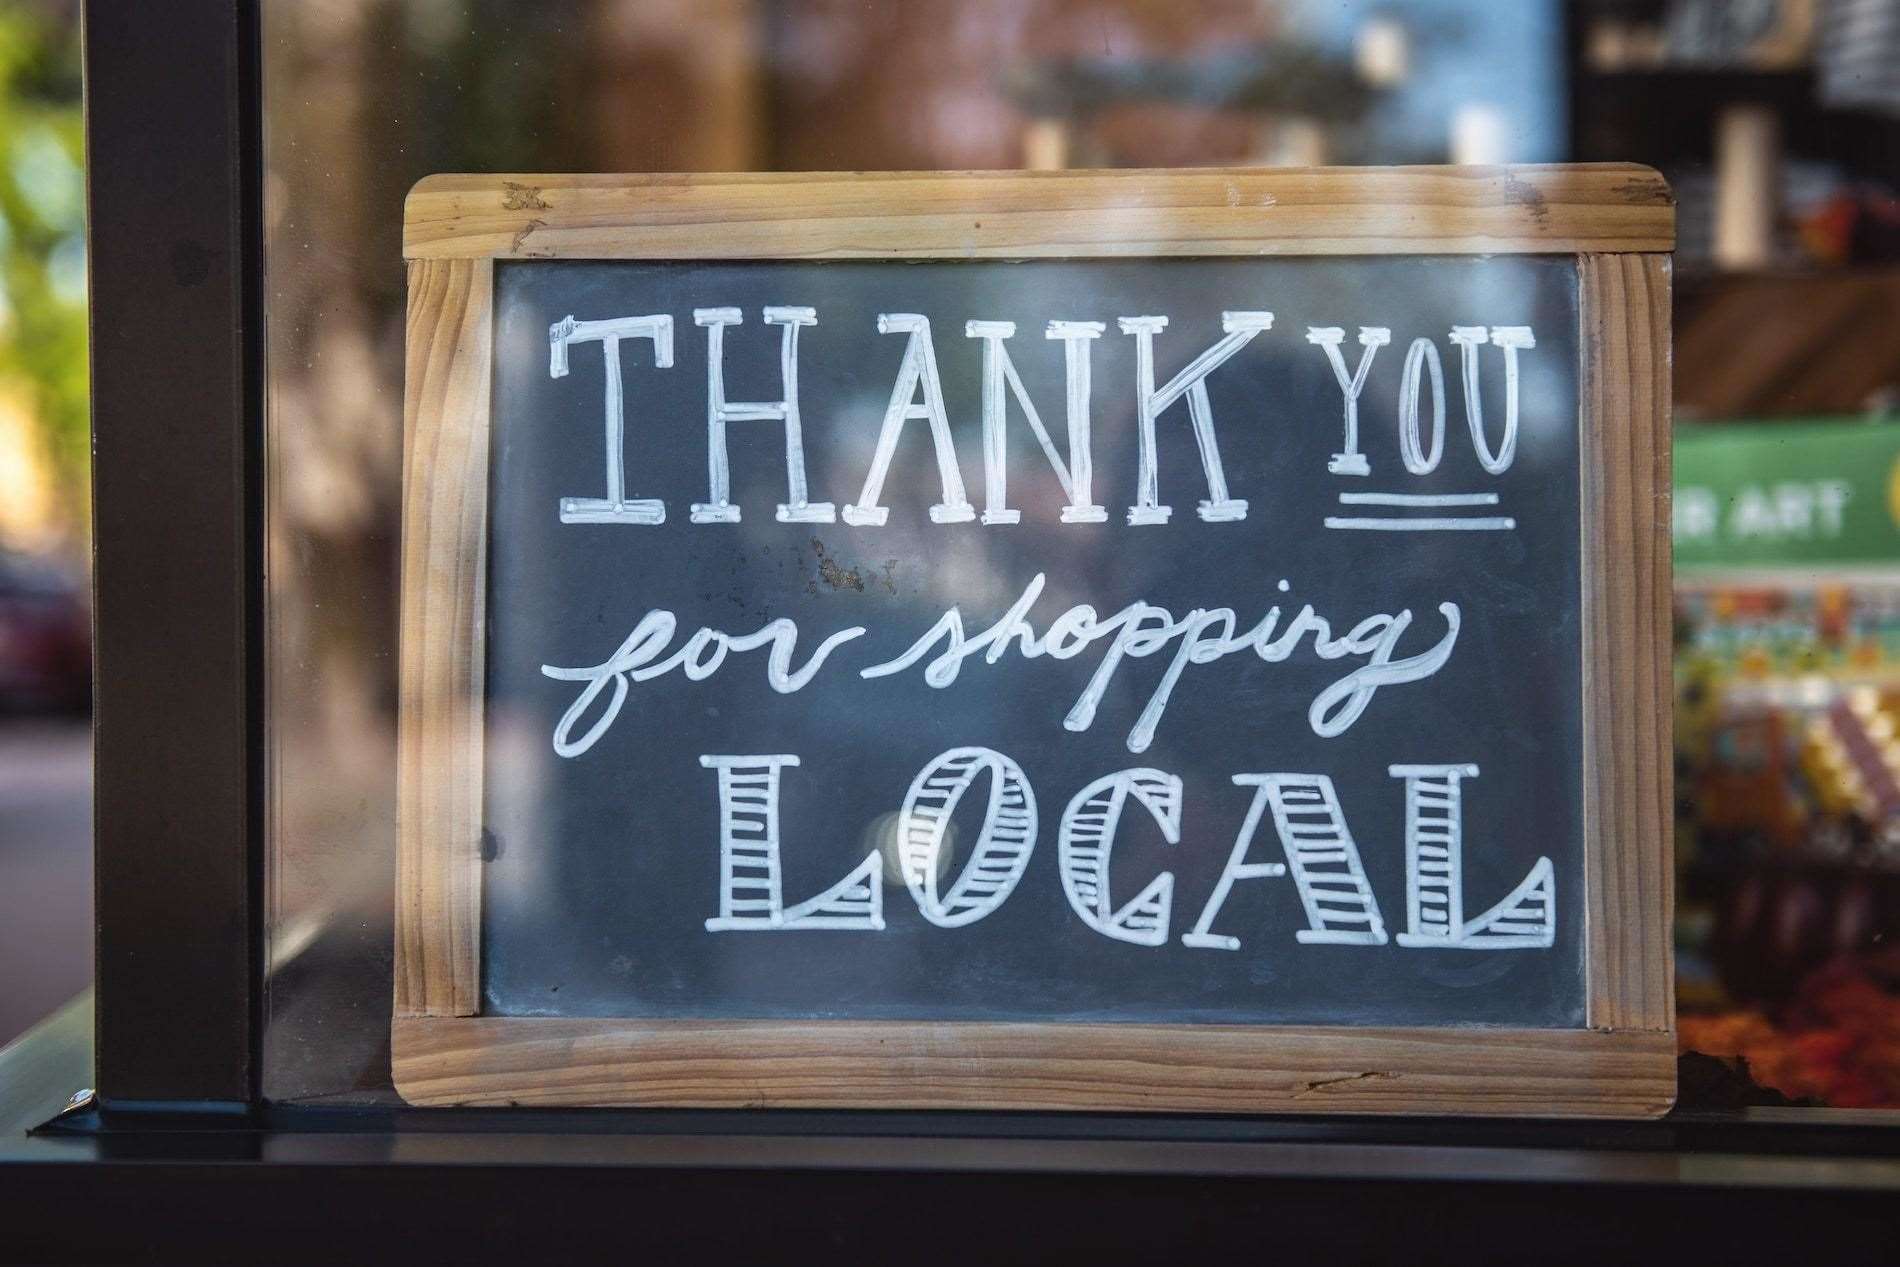 Supporting local businesses can bring all kinds of benefits.